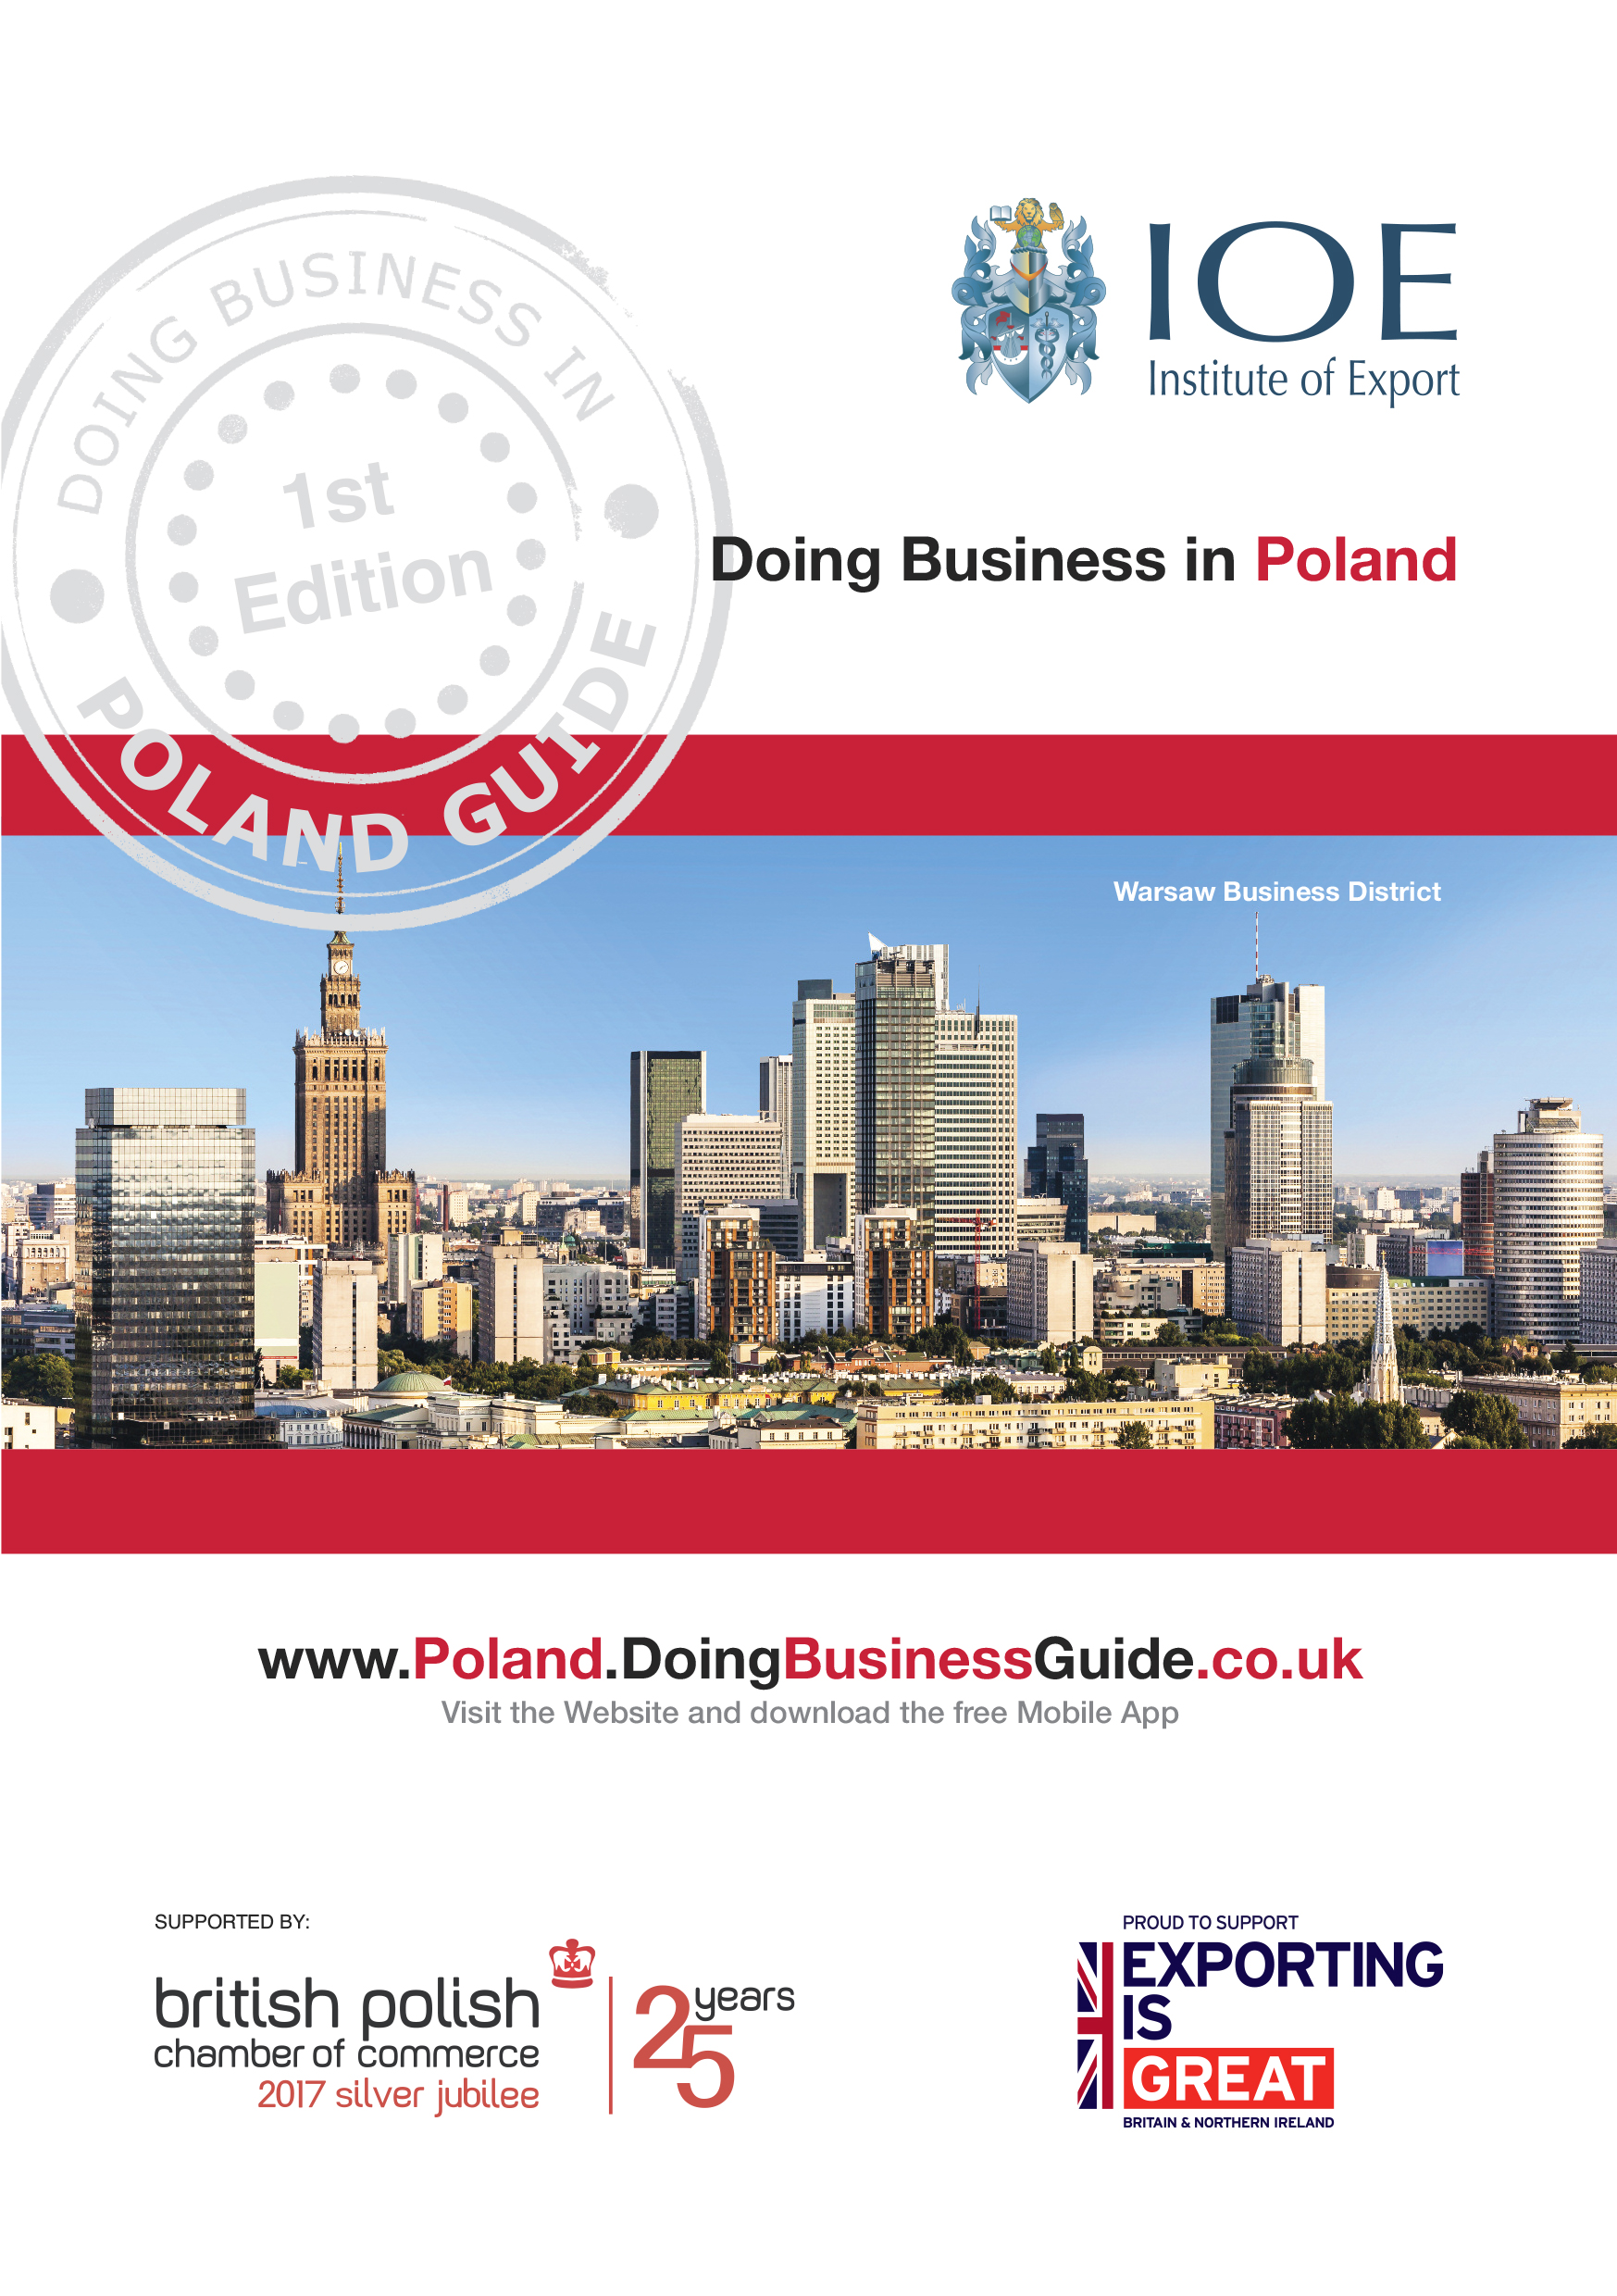 Doing Business in Poland guide front cover